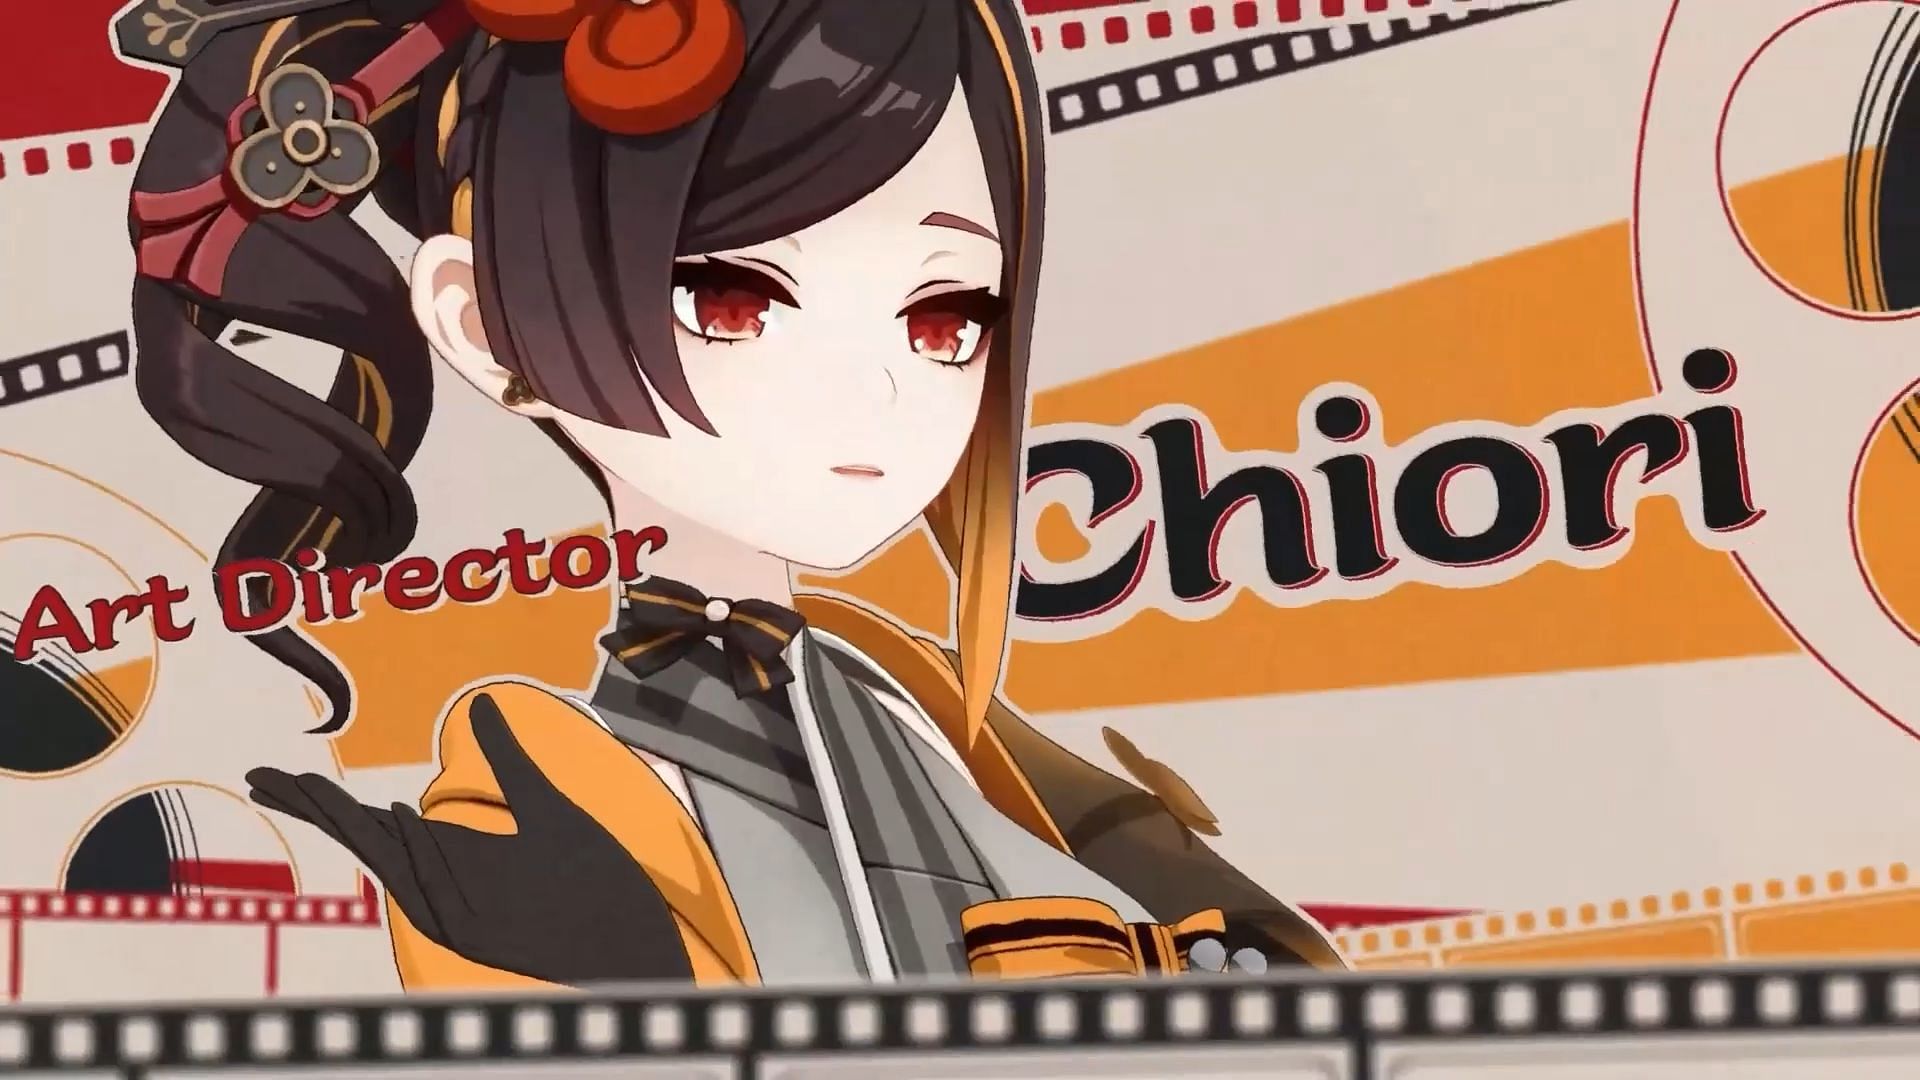 Chiori will appear in version 4.3 (Image via HoYoverse)